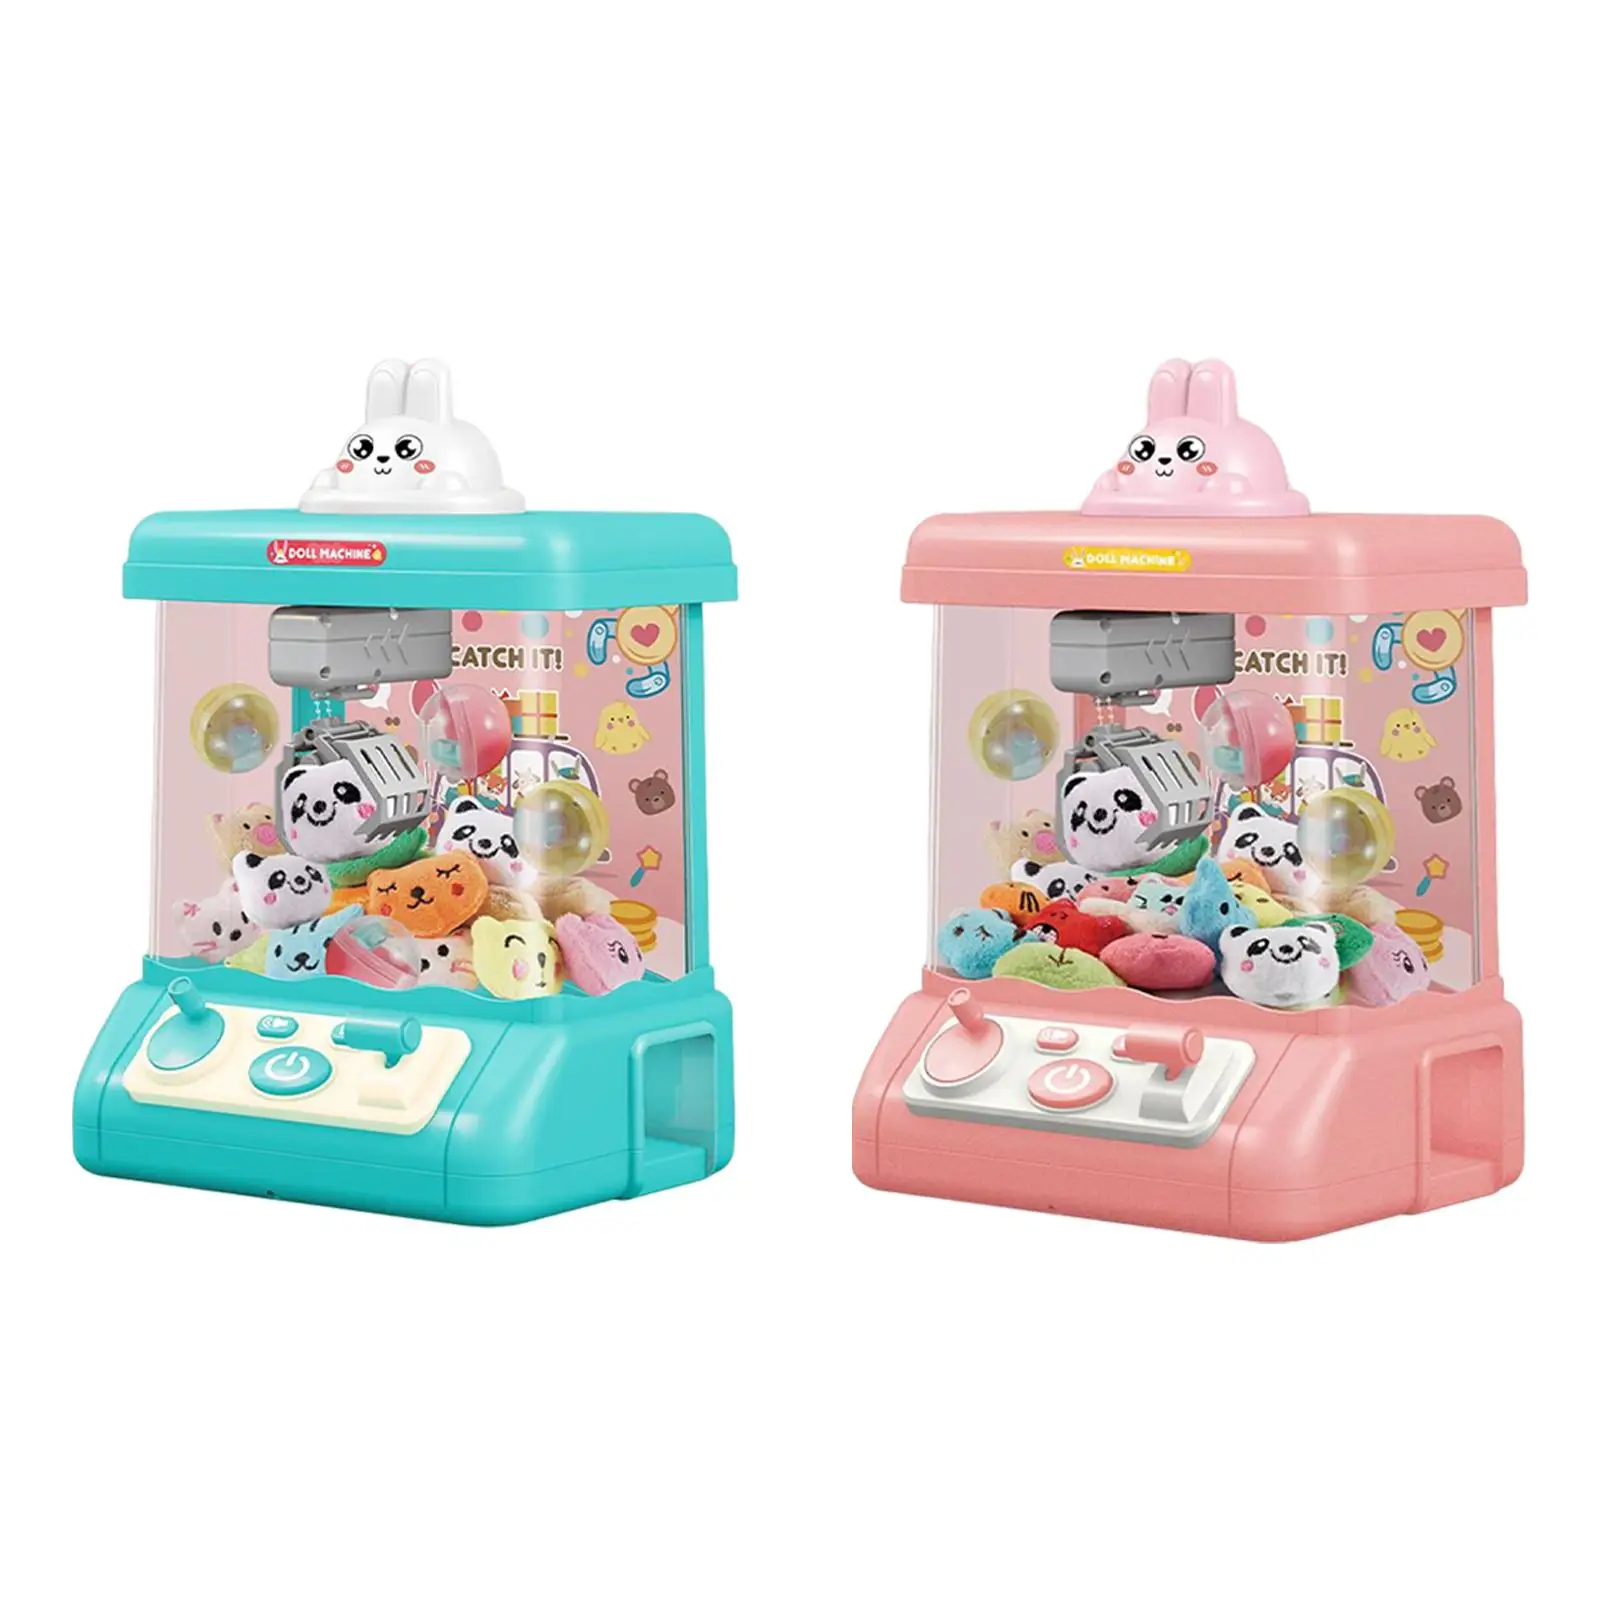 Claw Machine Electronic Arcade Game Catching Doll Machine for Birthday Gifts Children